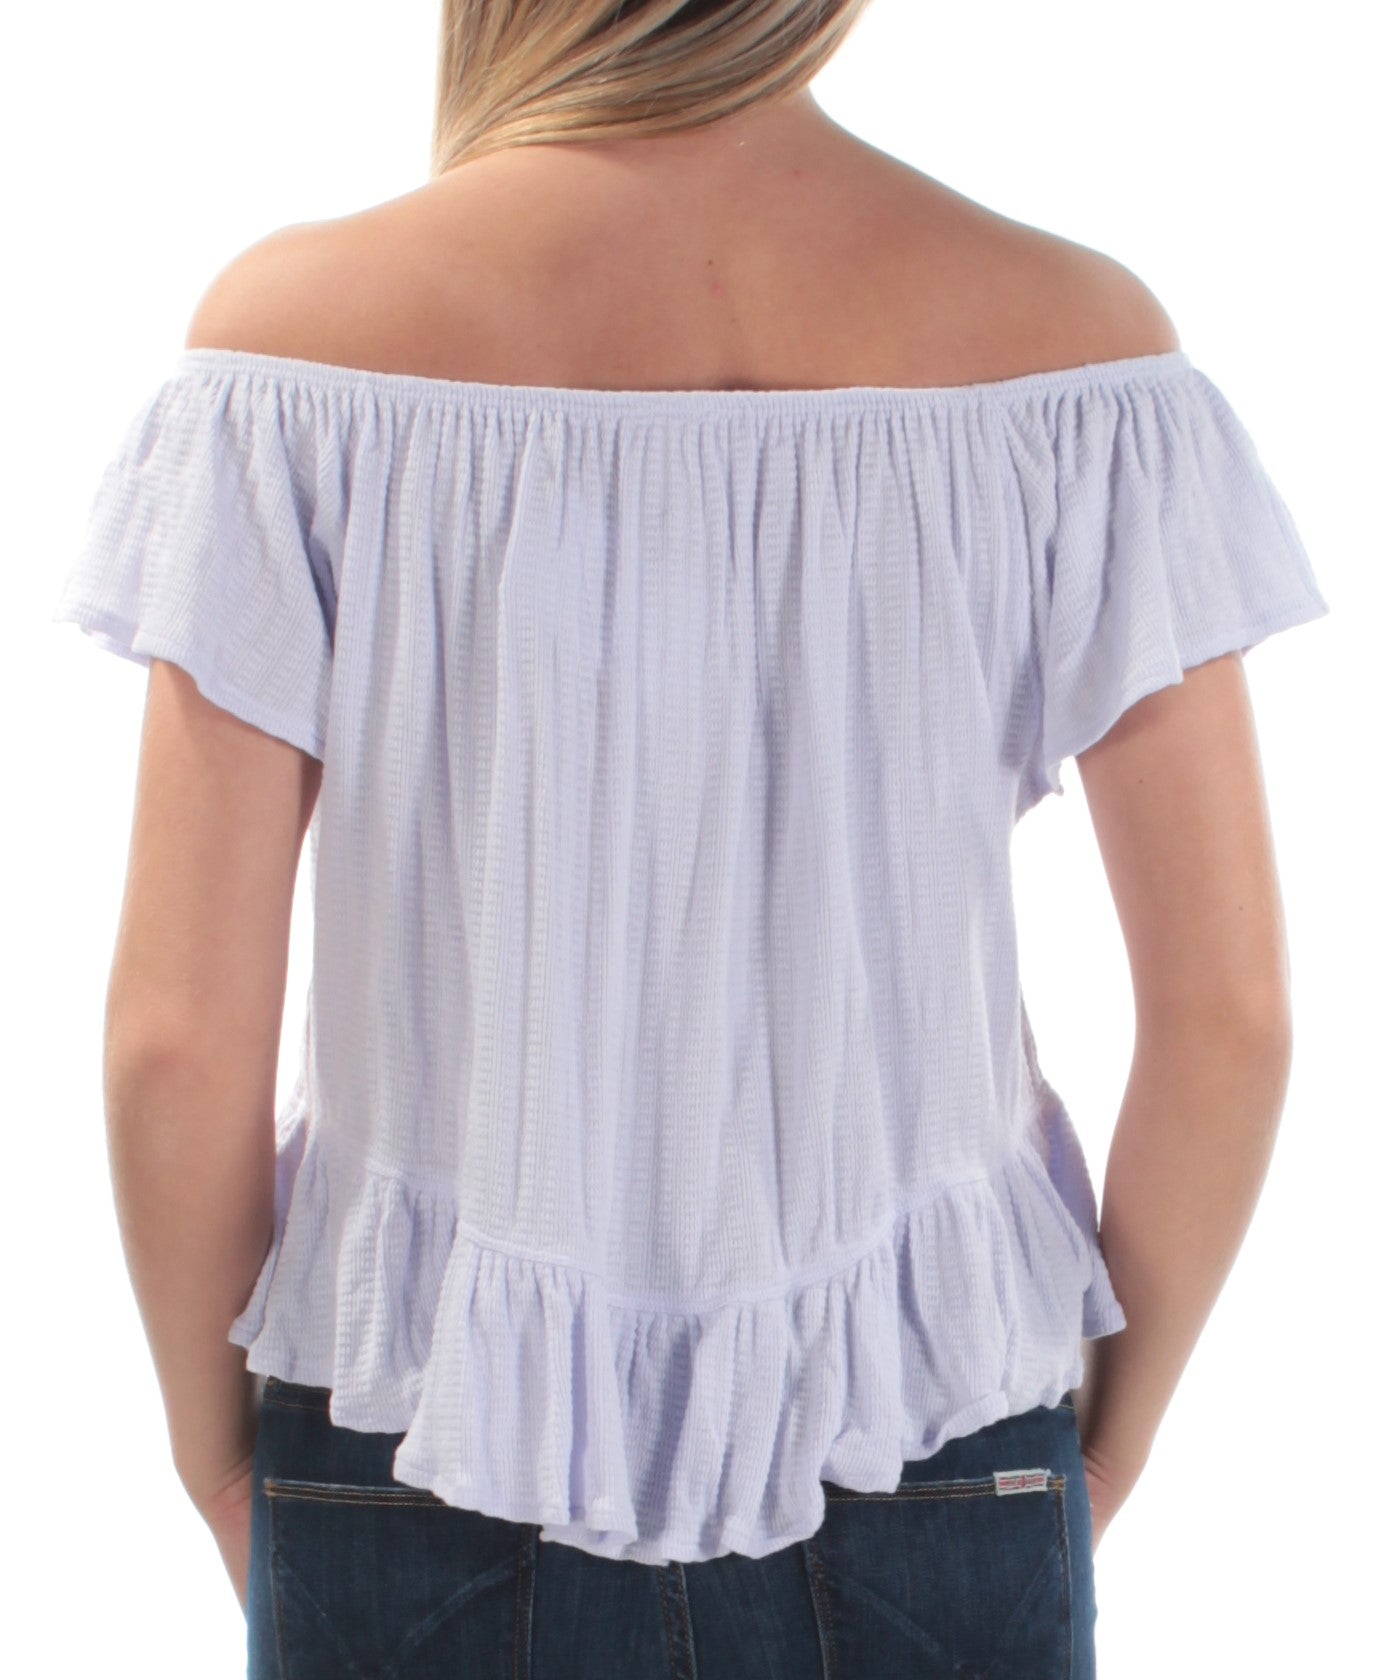 WE THE FREE Womens Short Sleeve Off Shoulder Top